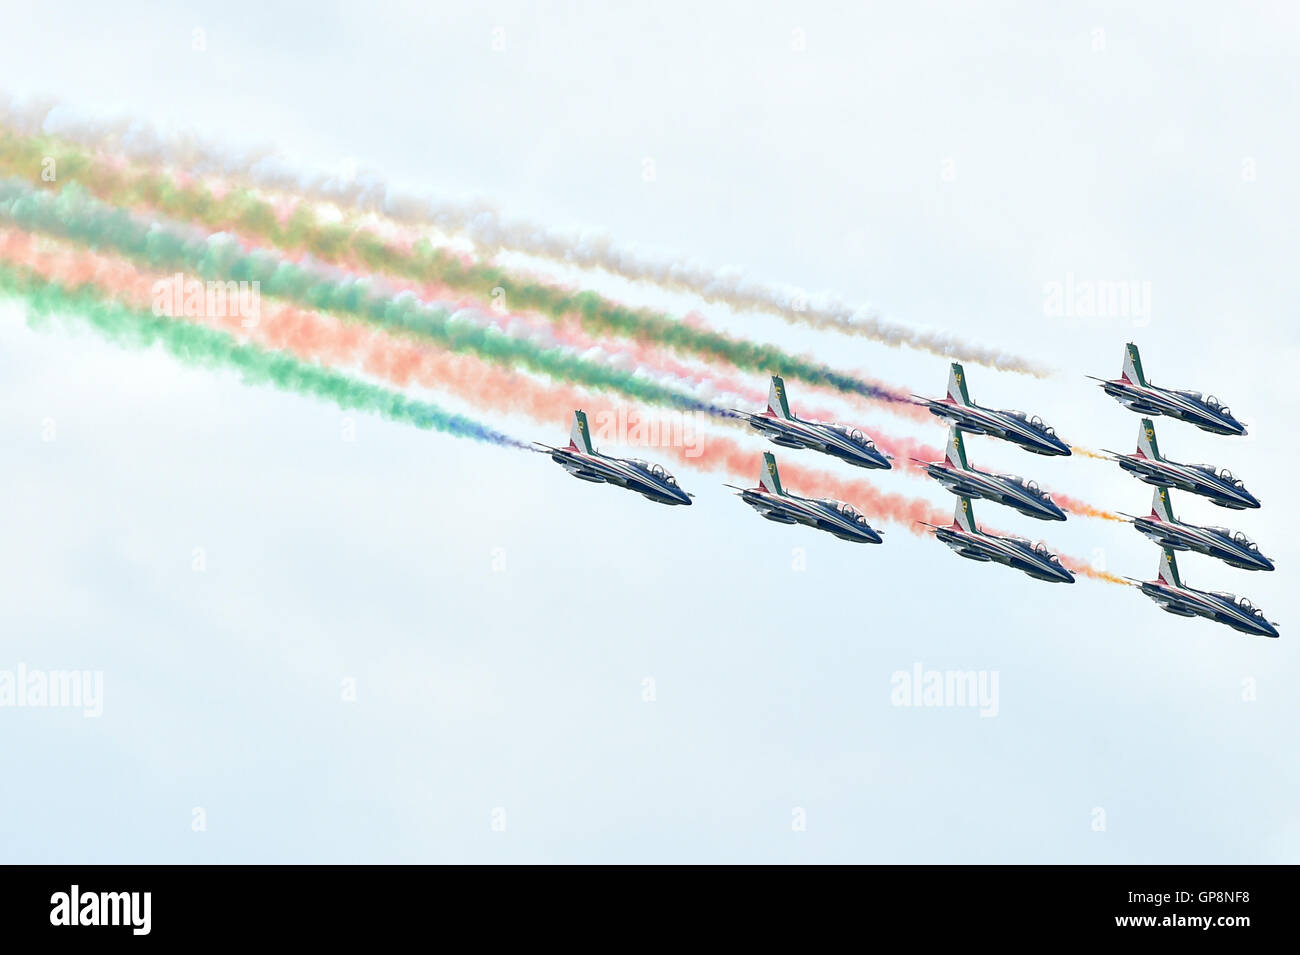 Zeltweg, Austria. 2nd Sep, 2016. Italy's Frecce Tricolori team performs during the AirPower 2016 in Zeltweg, Austria, Sept. 2, 2016. Credit:  Qian Yi/Xinhua/Alamy Live News Stock Photo